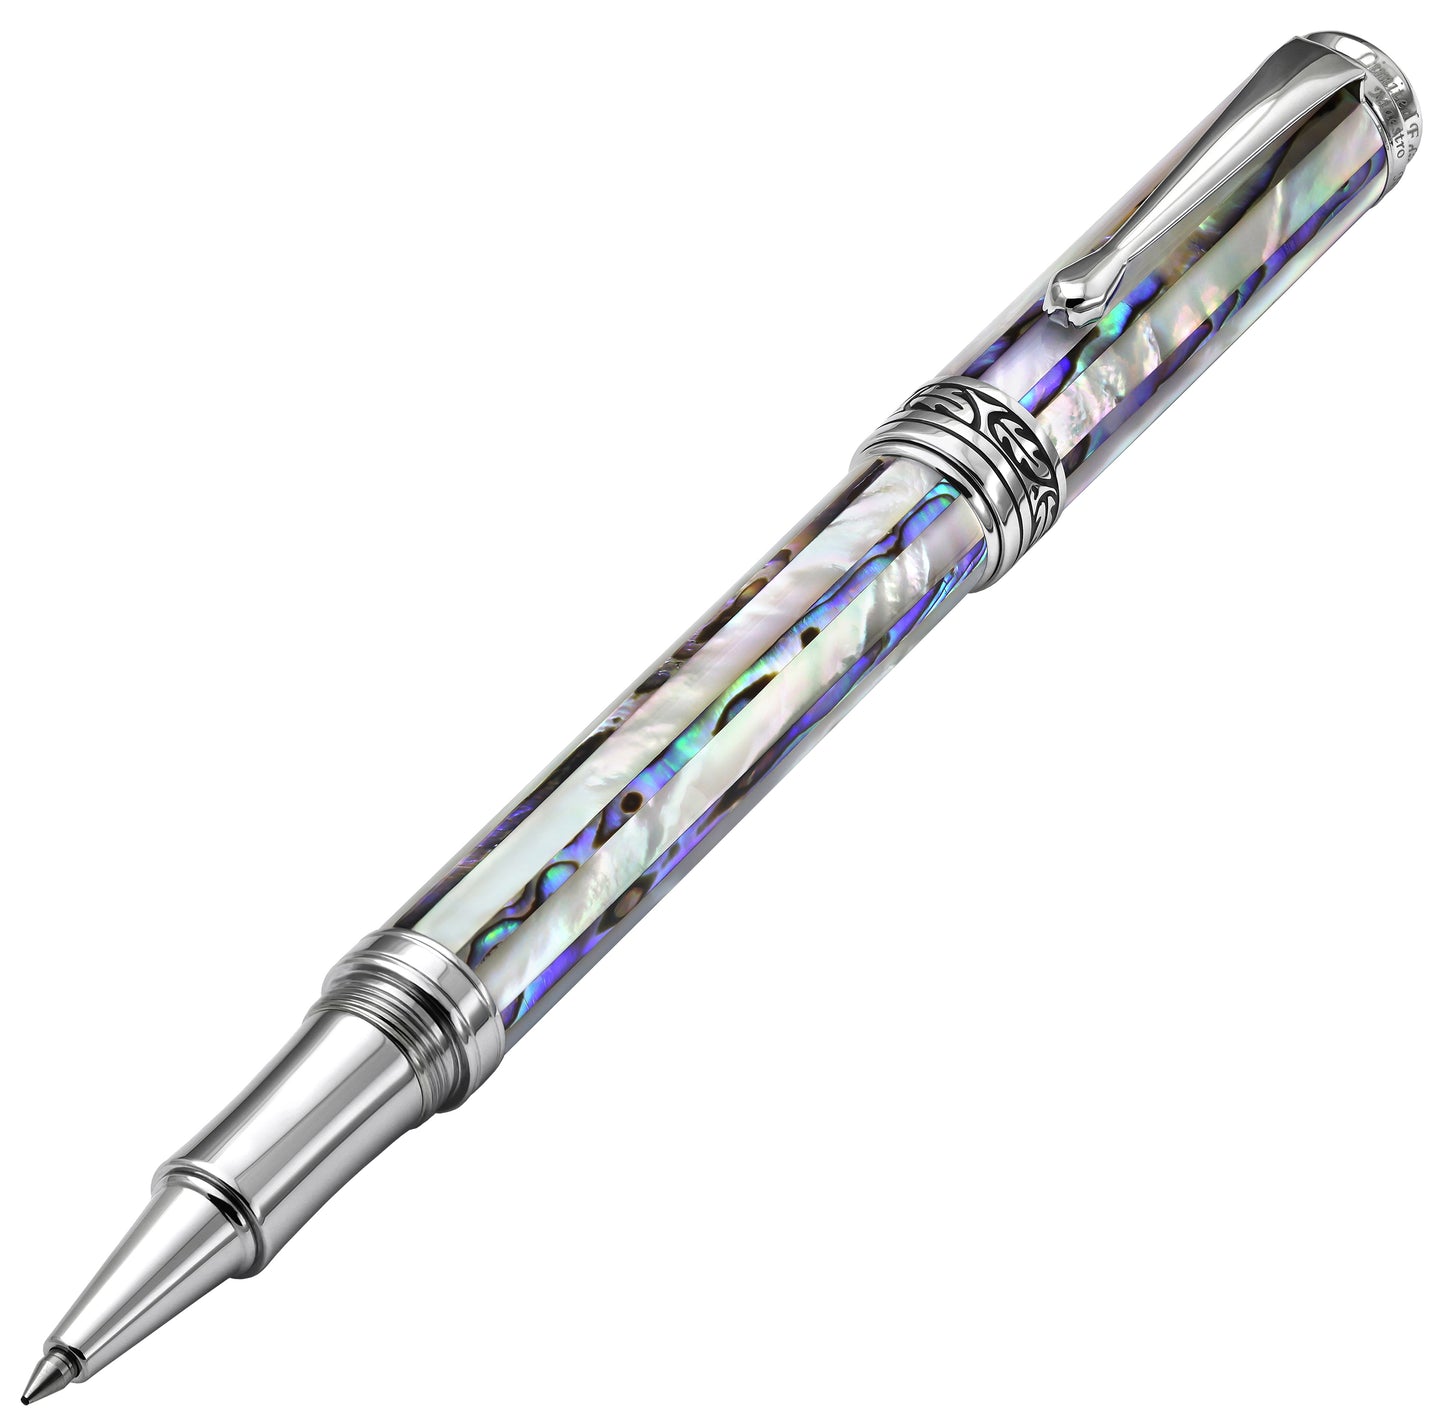 Maestro Jubilee mother-of-pearl Abalone Shell rollerball Pen Uncapped at an Angle